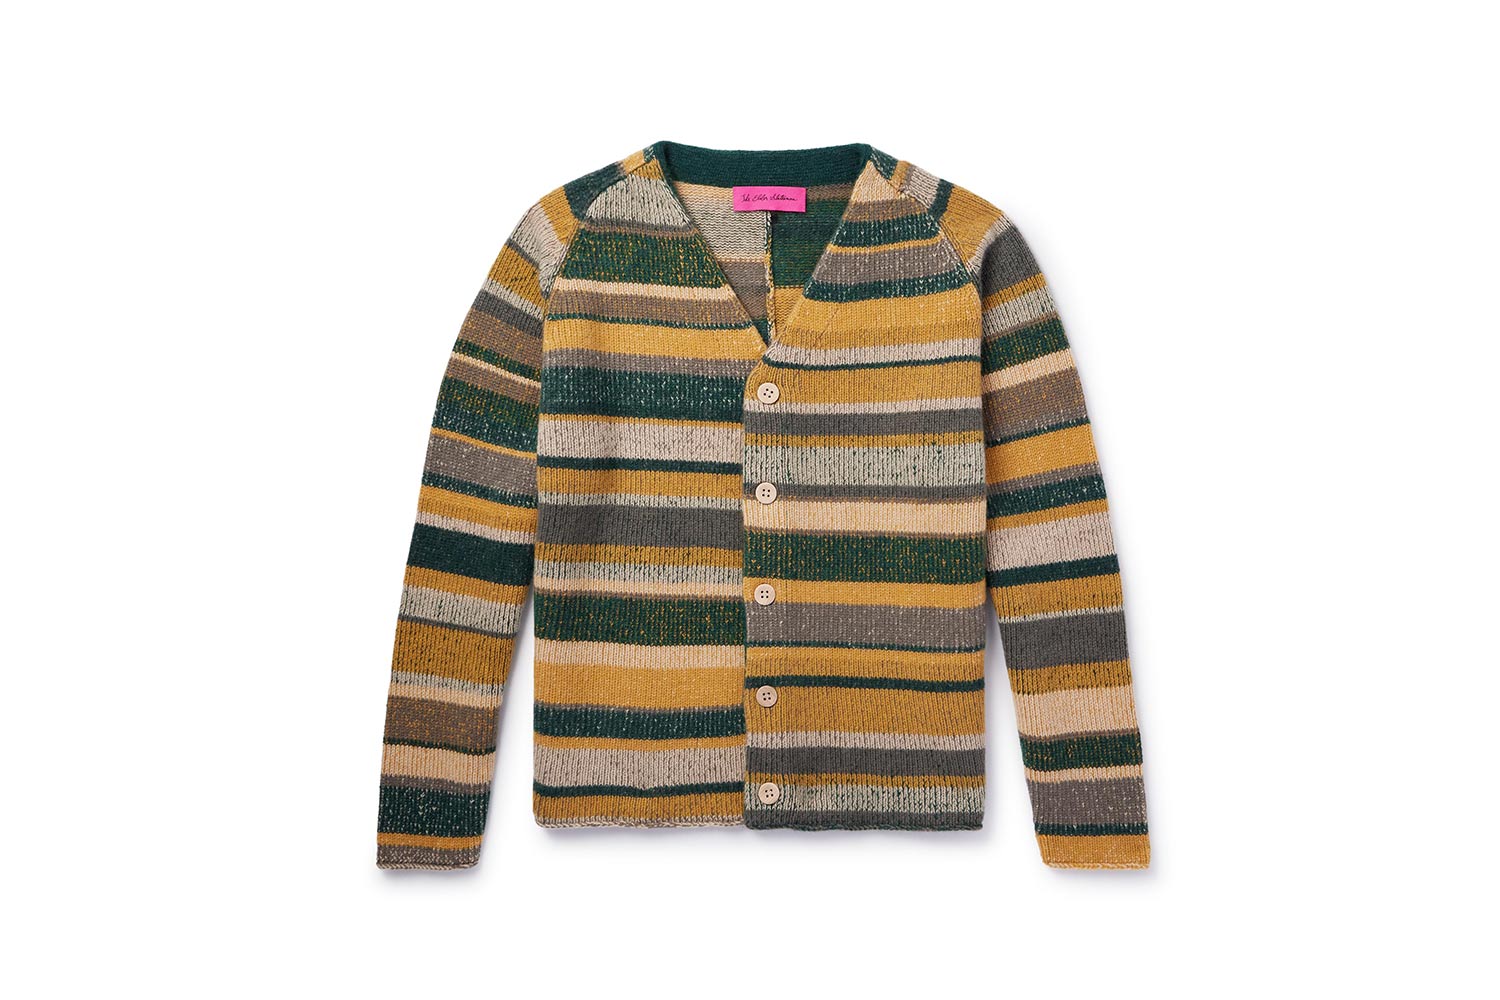 Green and yellow striped cardigan sweater with buttons on a white background